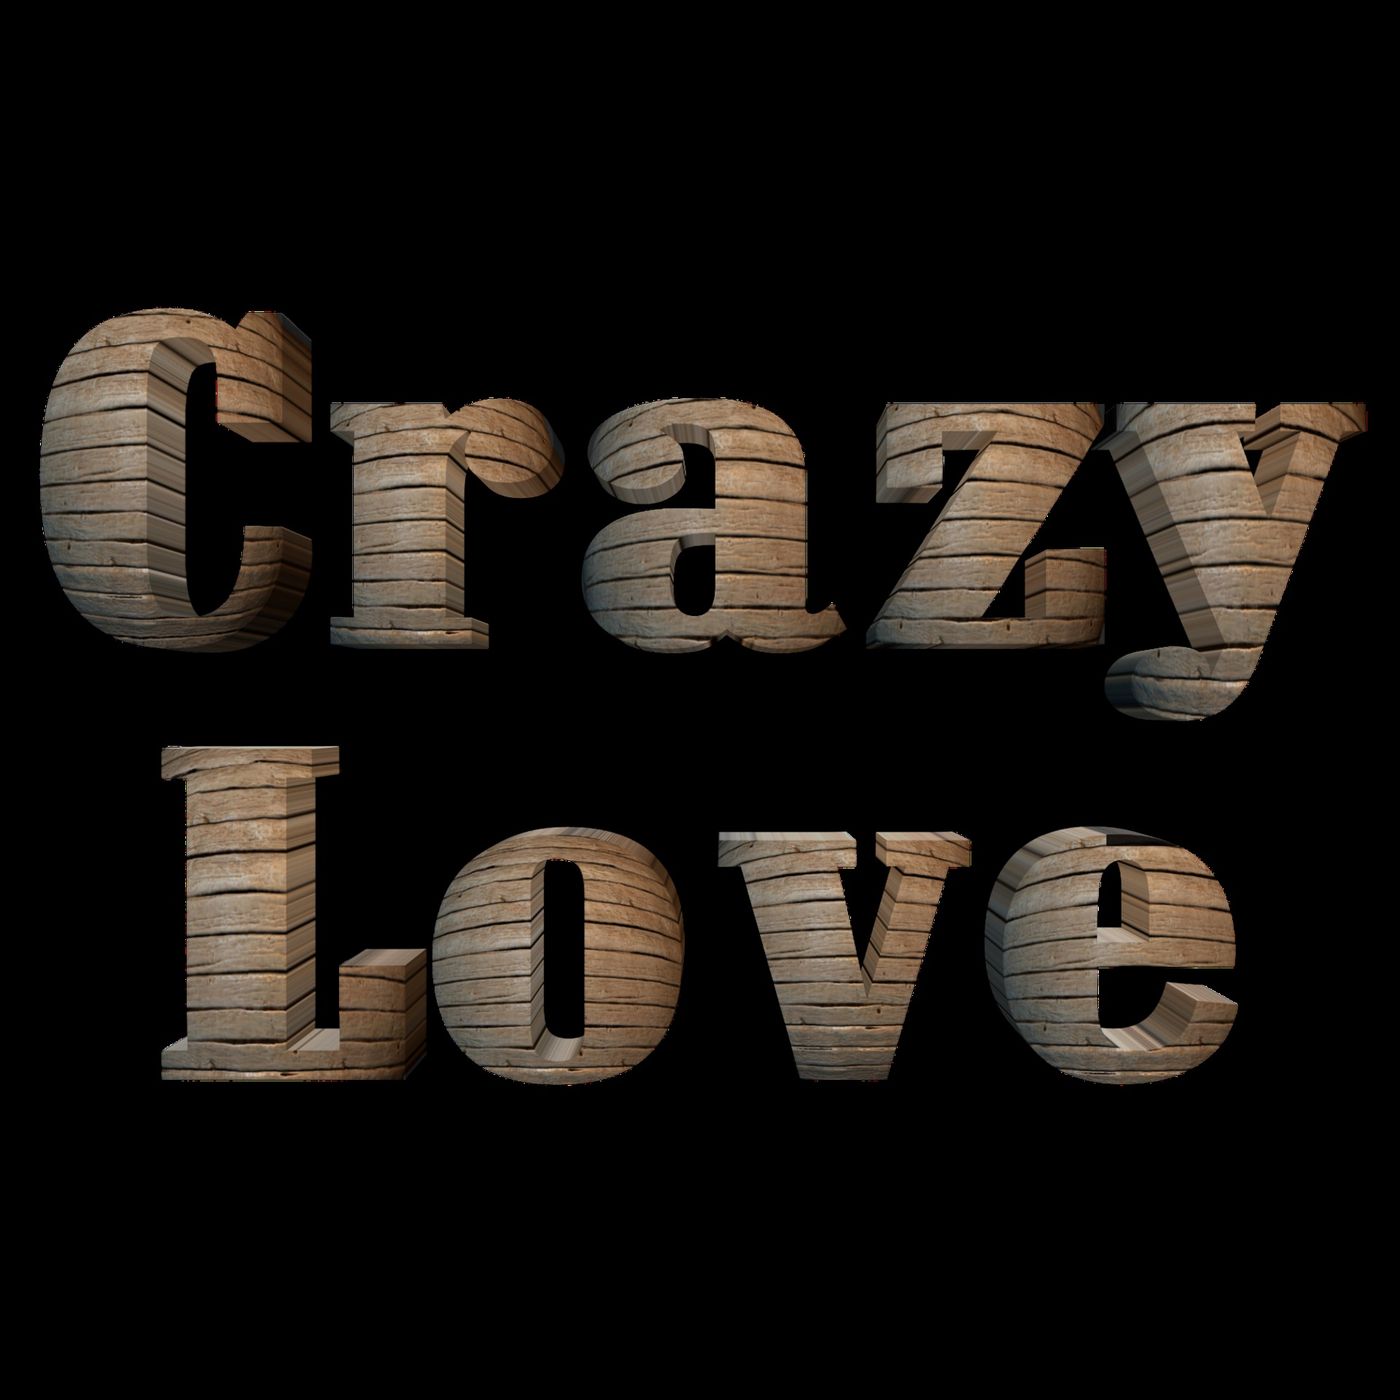 Episode 361 Love Makes You Do Crazy Things